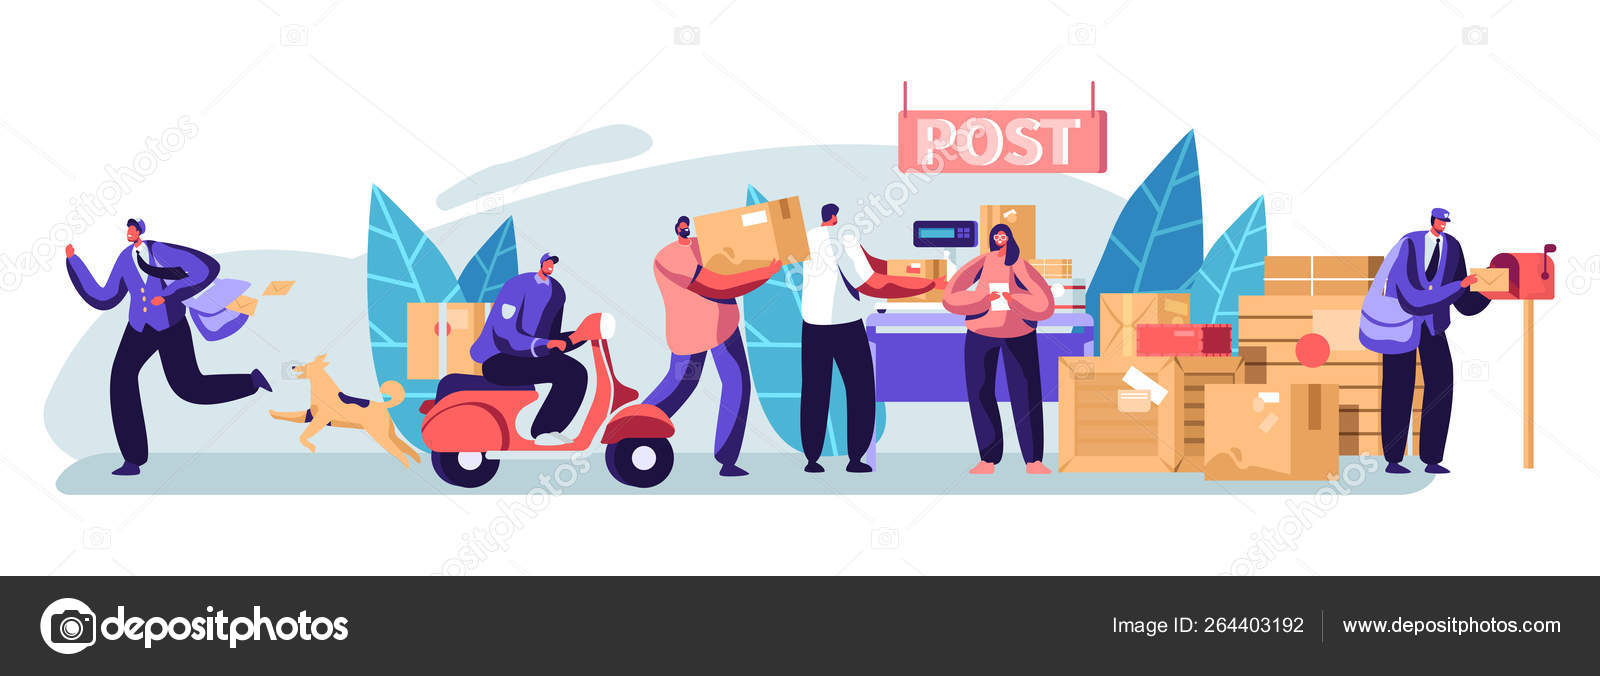 People in Post Office Send Letters and Parcels. Postmen Deliver Mail and  Packages to Customers. Mail Delivery Service, Postage Transportation.  Profession, Occupation. Cartoon Flat Vector Illustration Stock Vector Image  by ©vectorlab #264403192